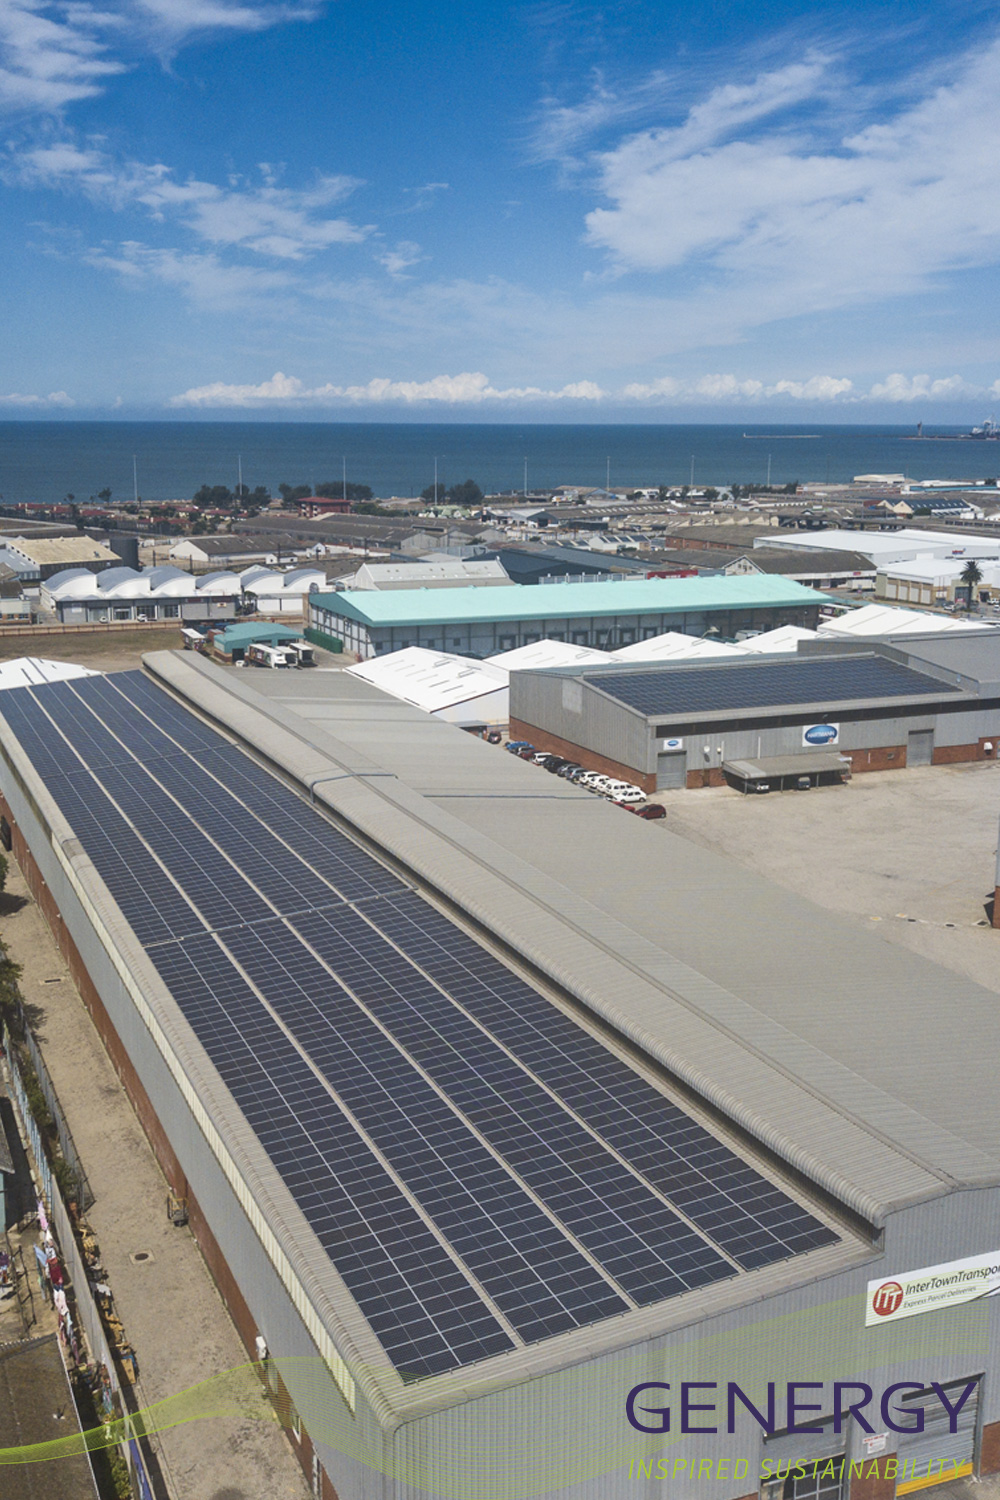 Solar panels on rooftop with sea in background with writing: GENERGY inspired sustainability